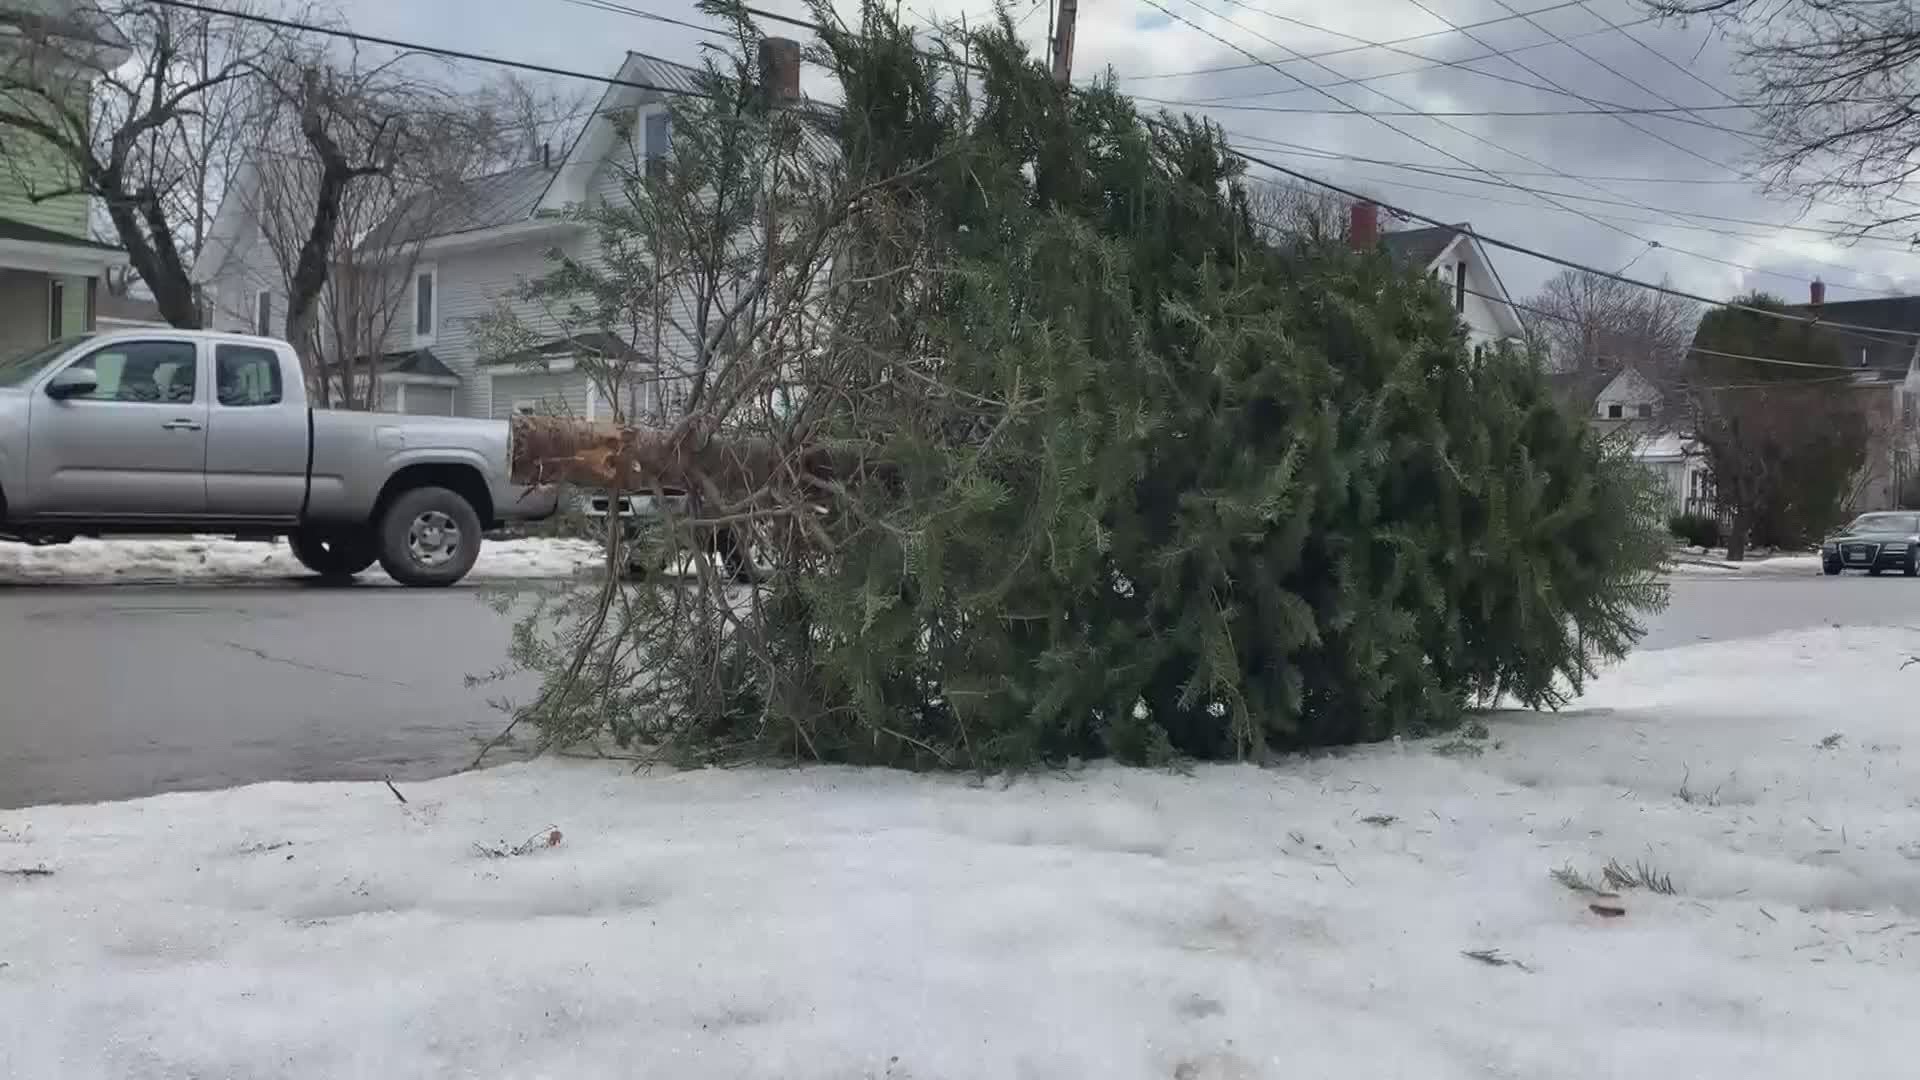 In Bangor, residents may place their trees curbside for pickup until Friday.